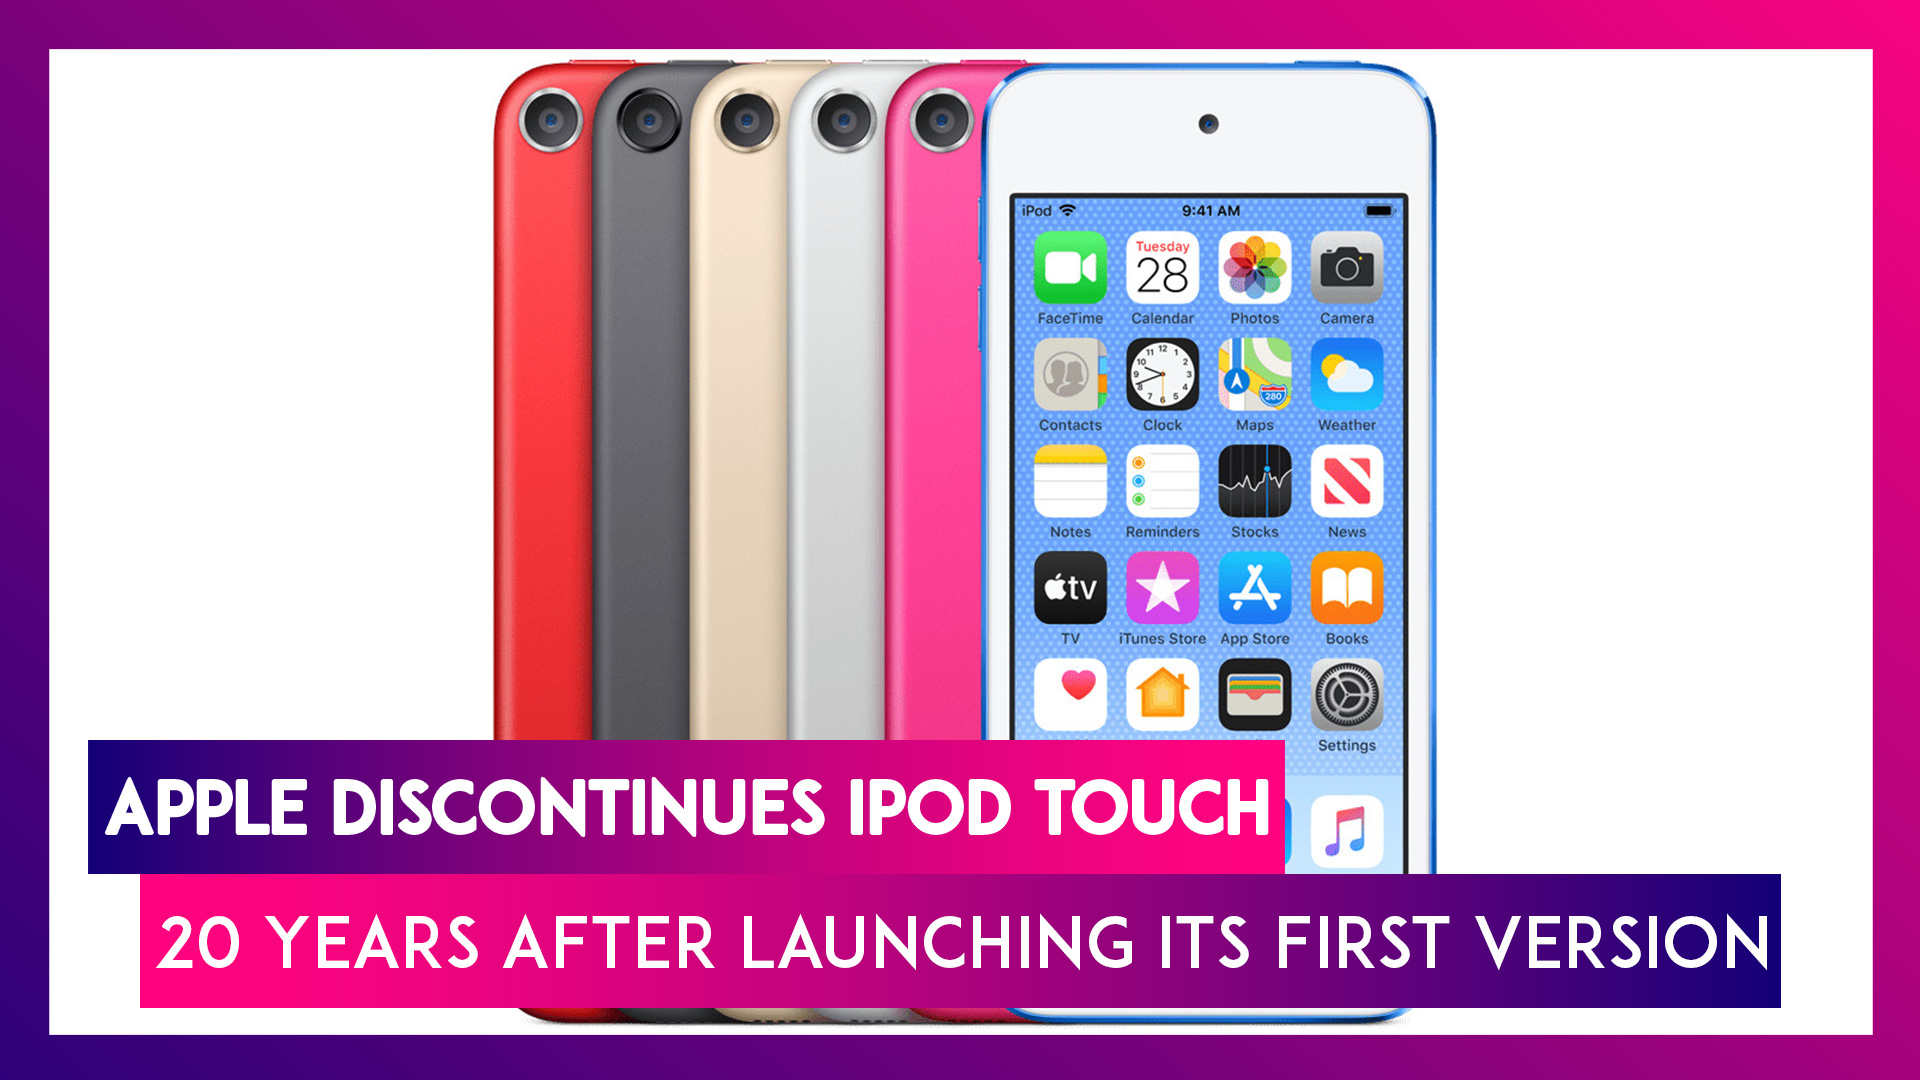 Apple Discontinues iPod Touch, 20 Years After Launching Its First Version